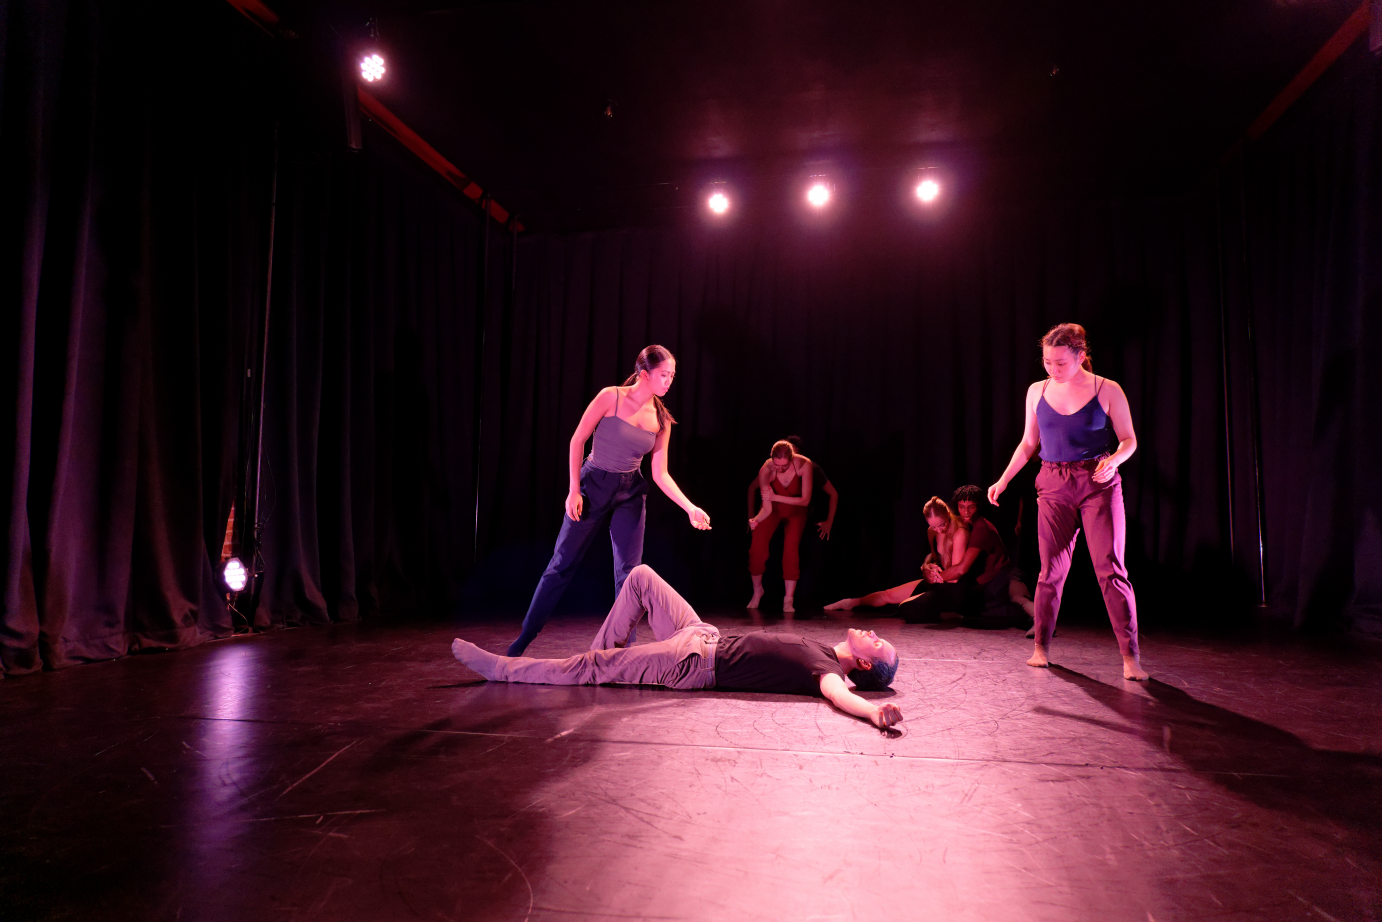 One dancer lies on the floor, with splayed arms akimbo and one knee bent. Two dancers hover over him. In the backbend, other dancers hold themselves.